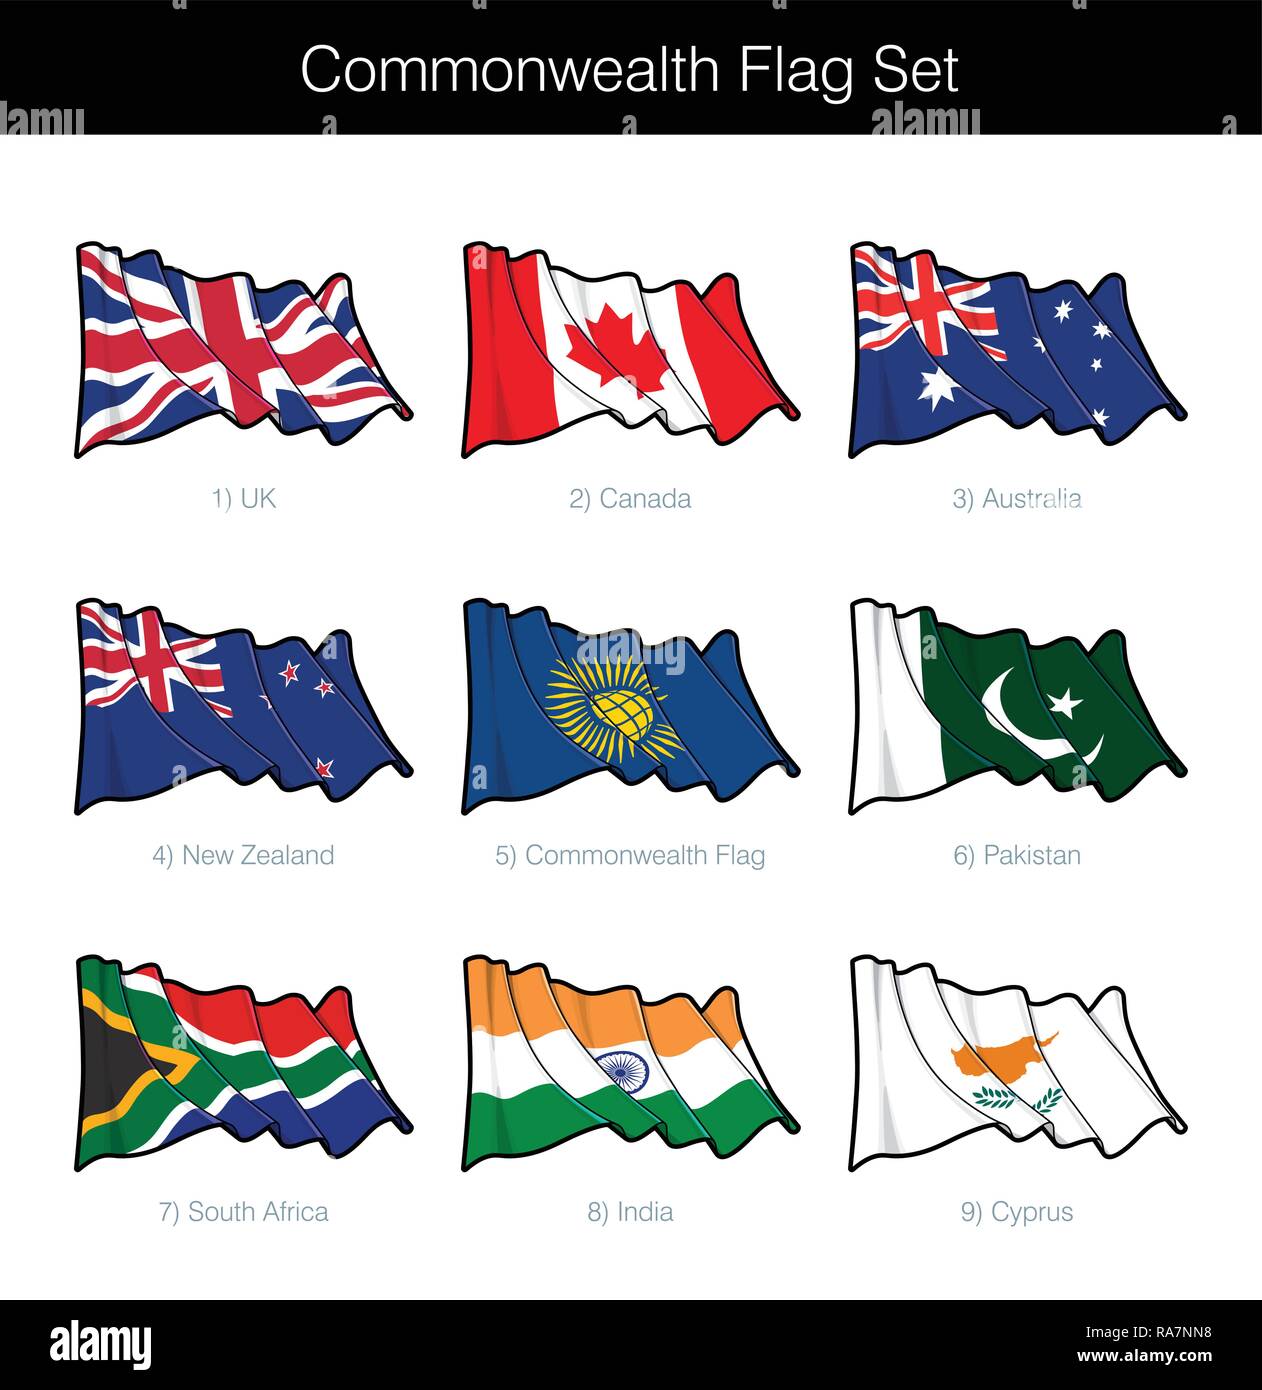 Waving Flag Set. The set includes the flags of UK, Canada, Australia, New Zealand, Pakistan, India, South Africa, Cyprus and the Commonwe Stock Vector Image & Art - Alamy